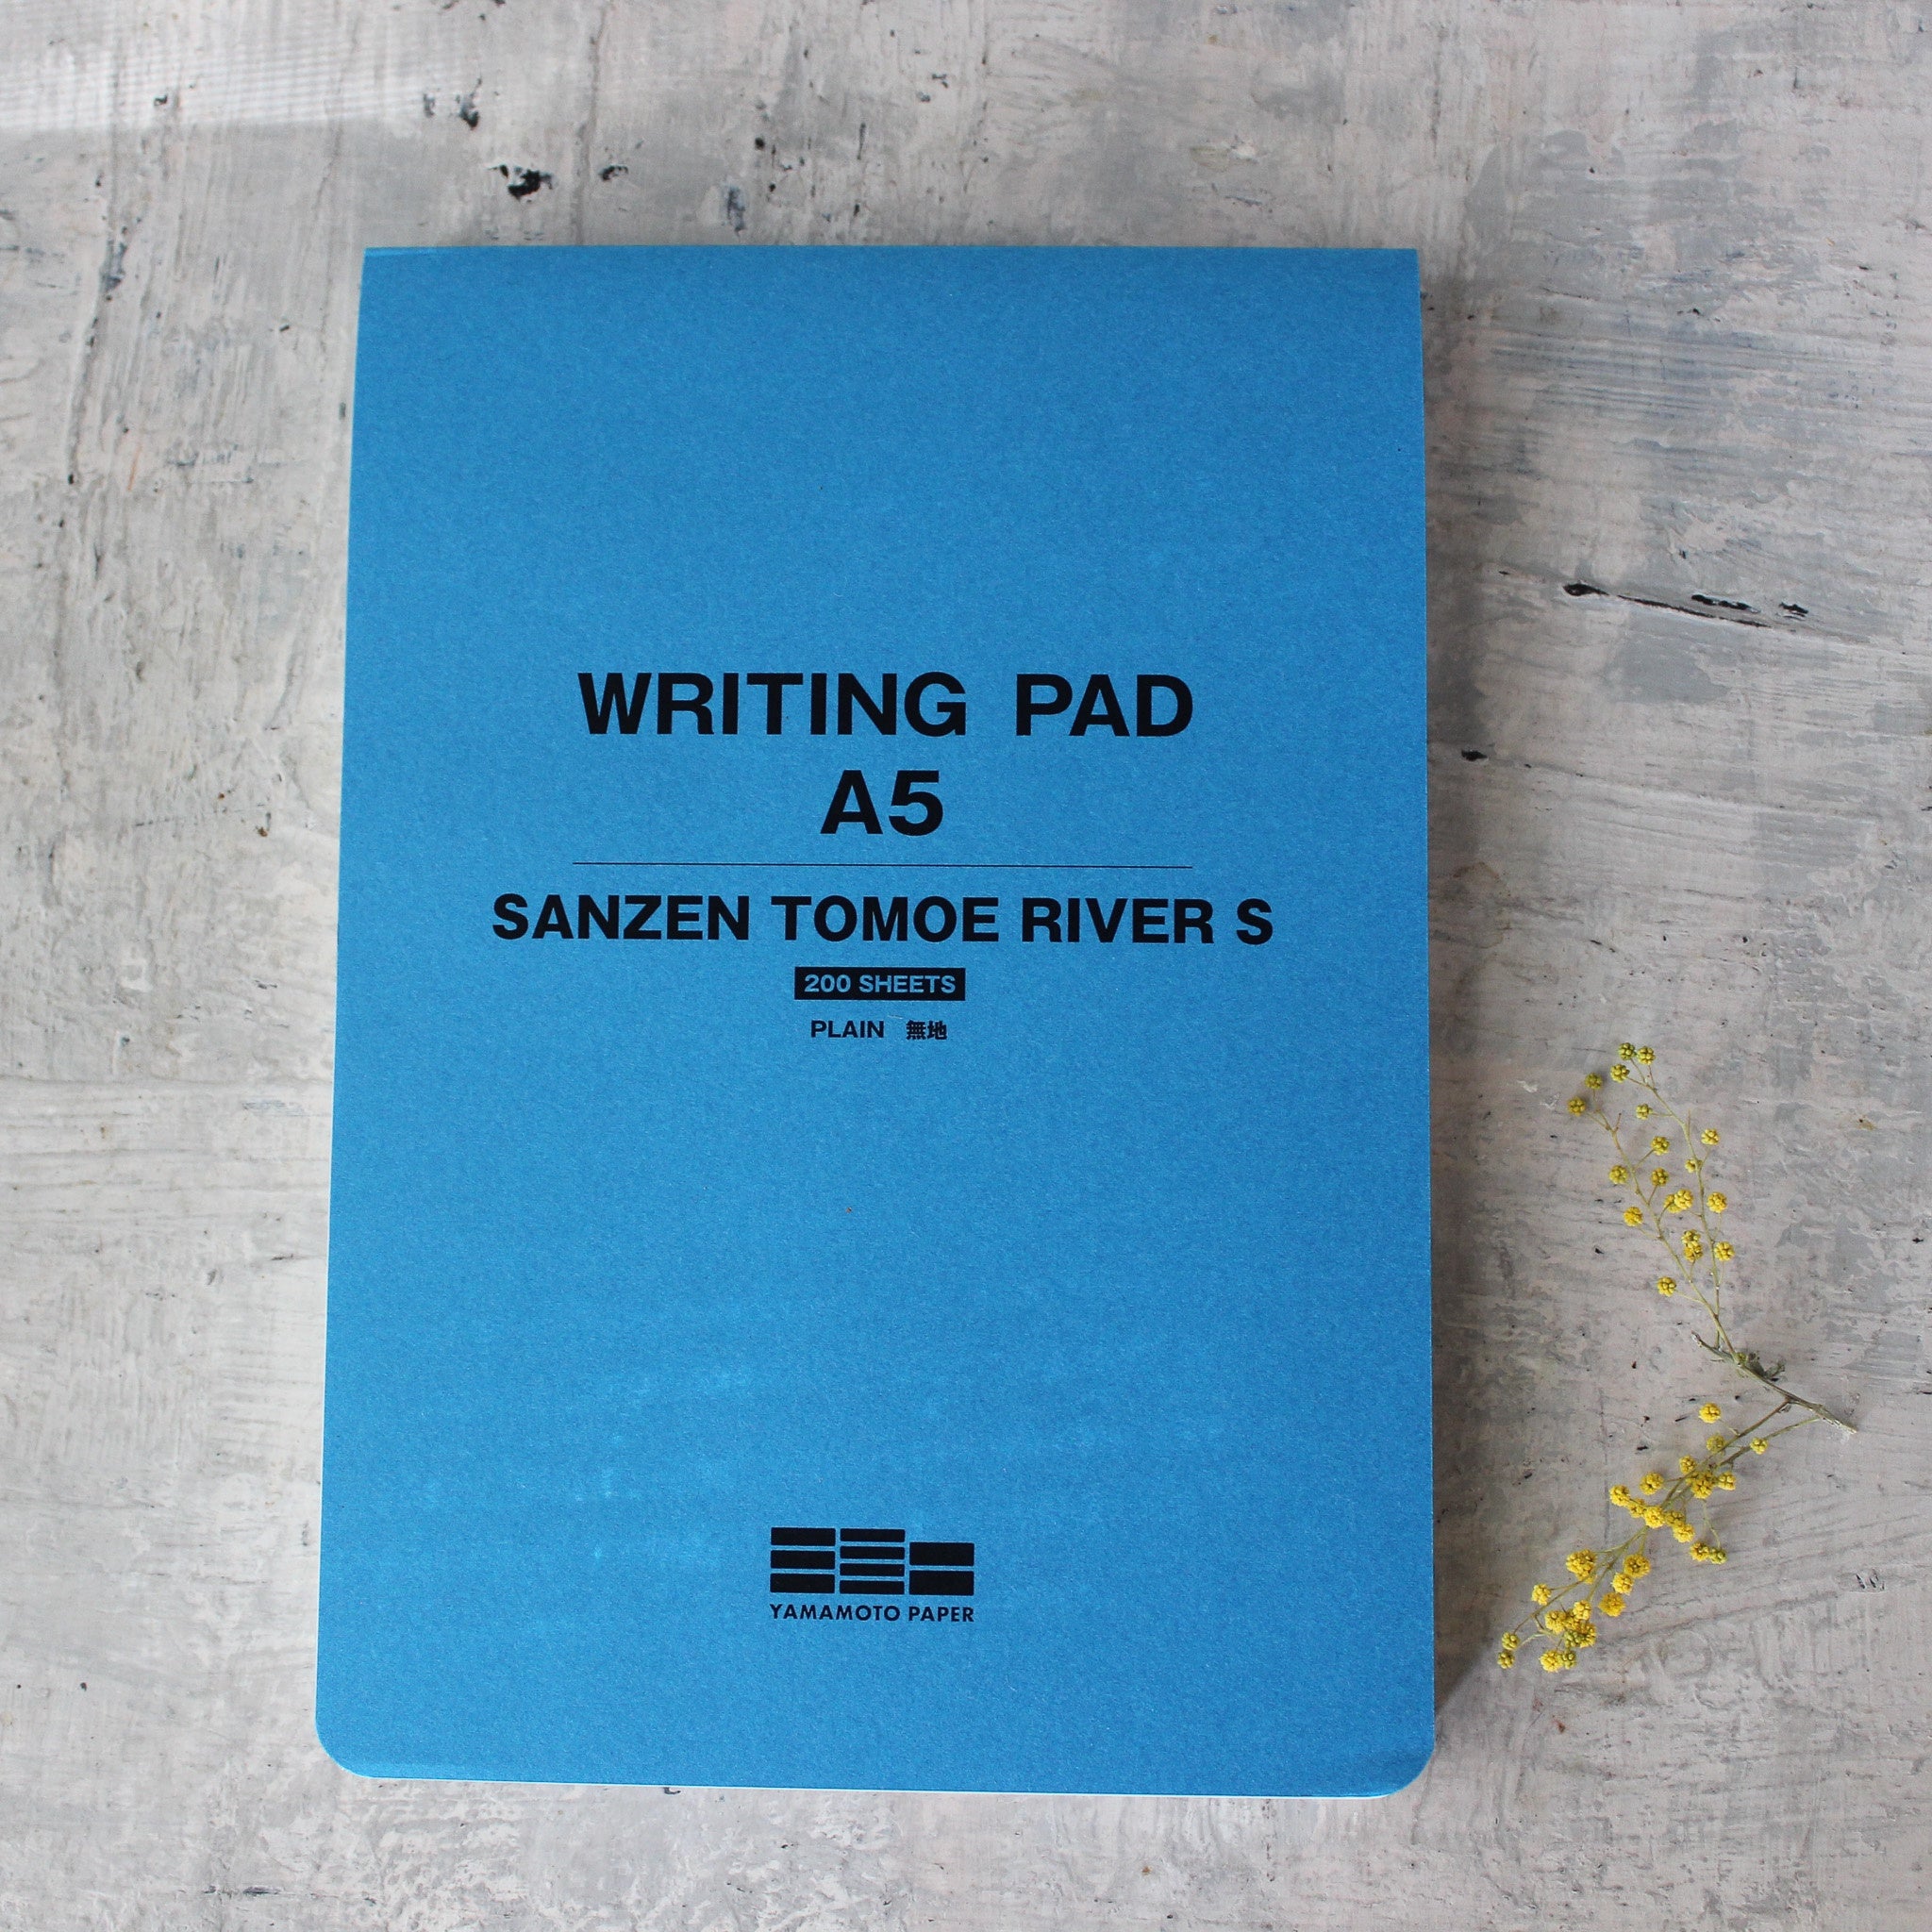 Writing Pad A5 - Sanzen Tomoe River S - Tribe Castlemaine